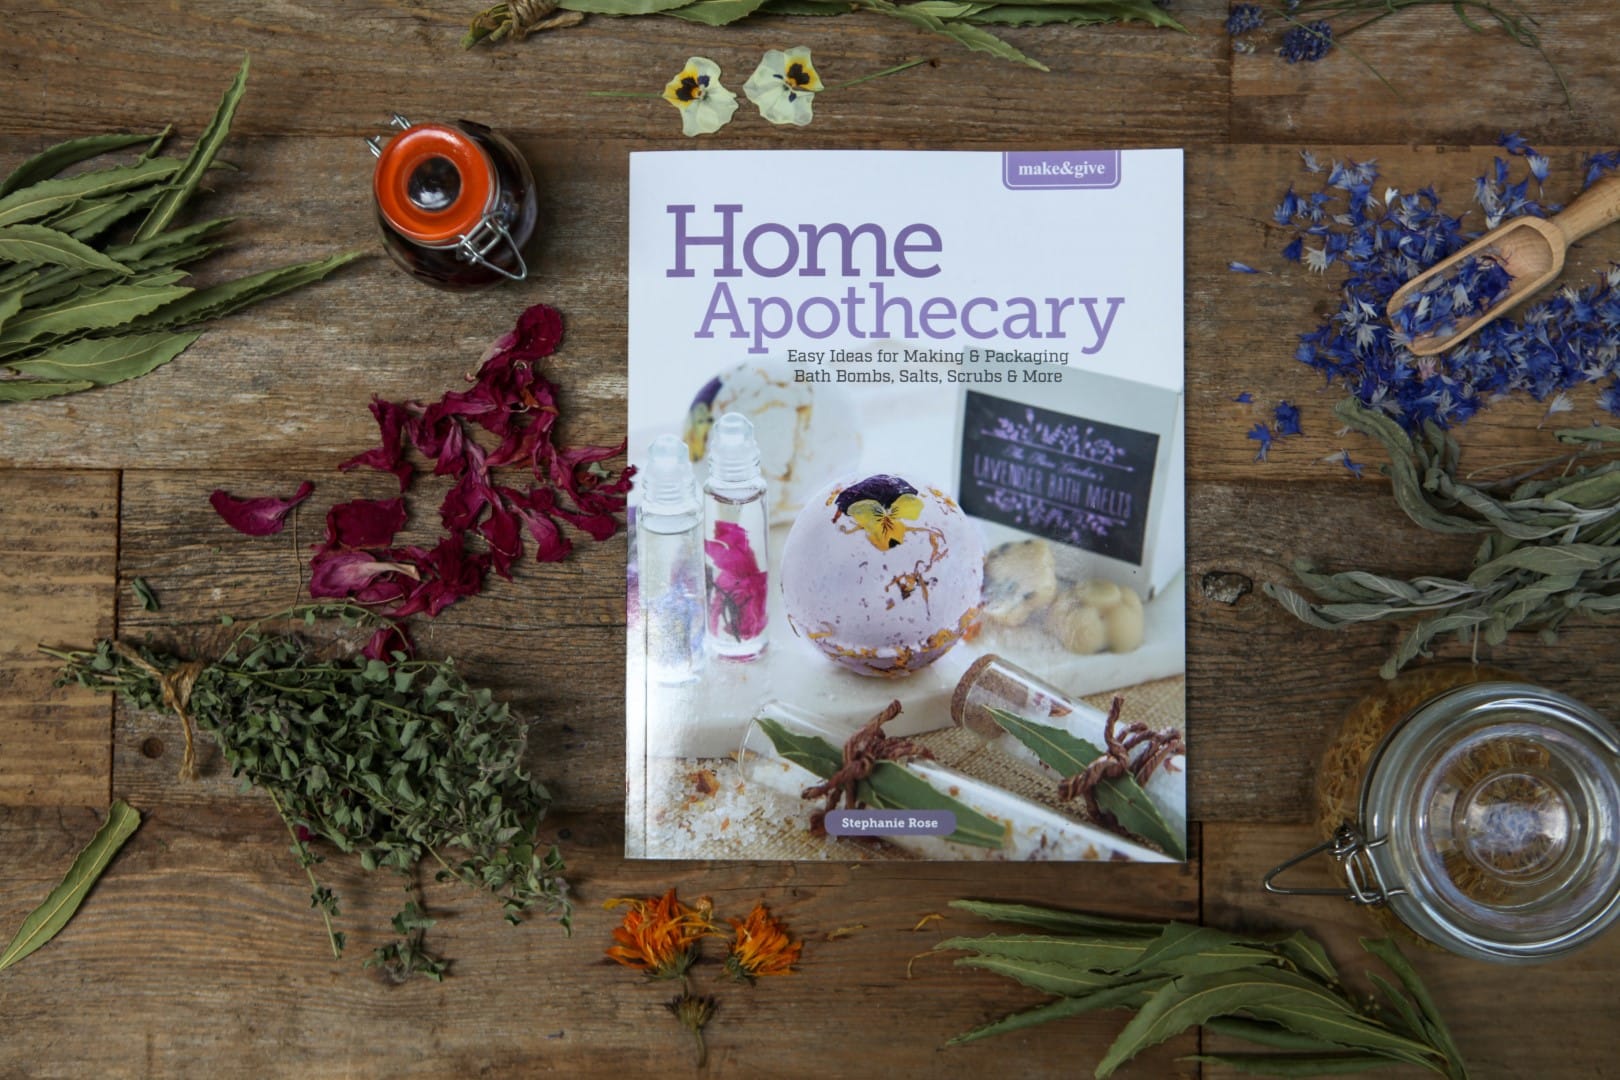 Make and Give Home Apothecary by Stephanie Rose